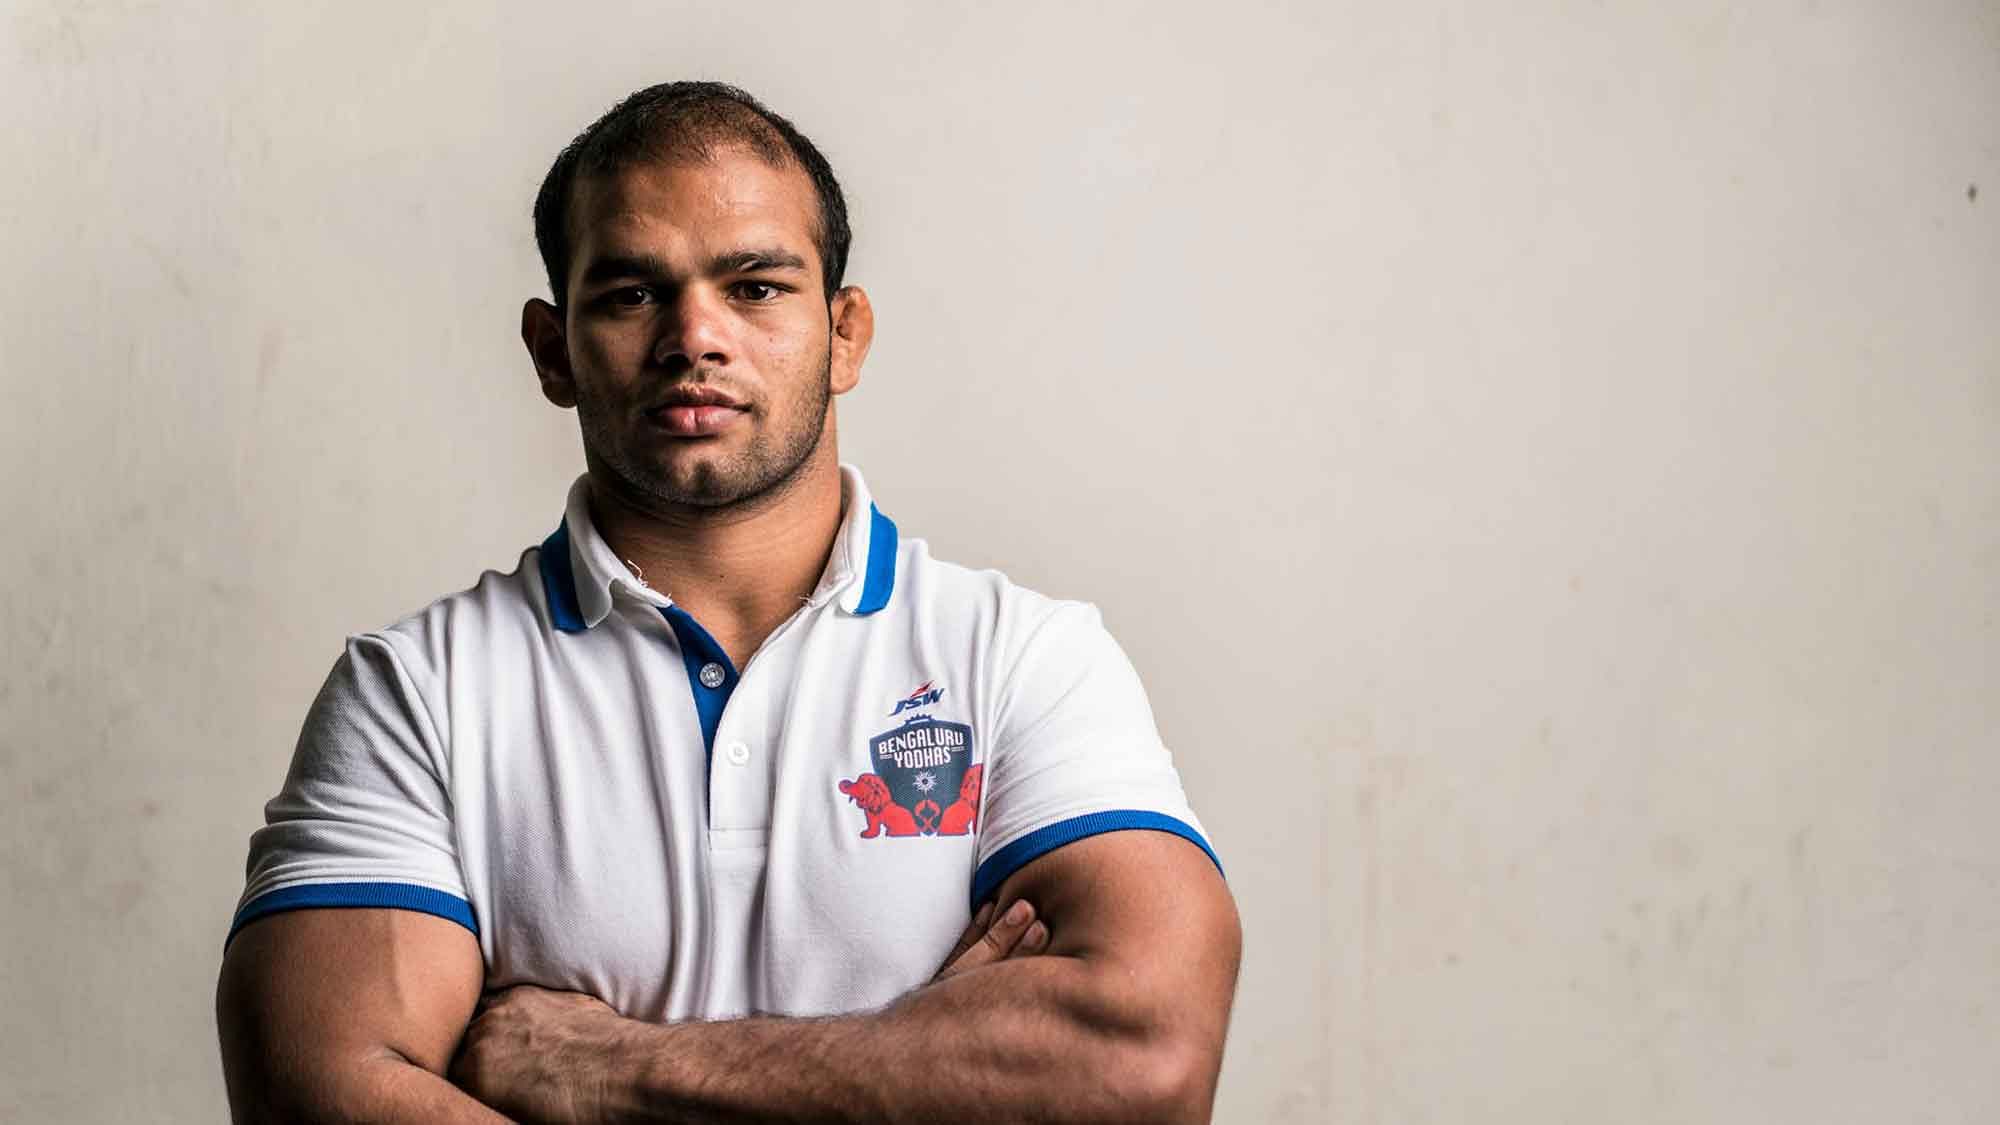 Narsingh Yadav is competing in his first event at the national level since serving a four-year doping ban.